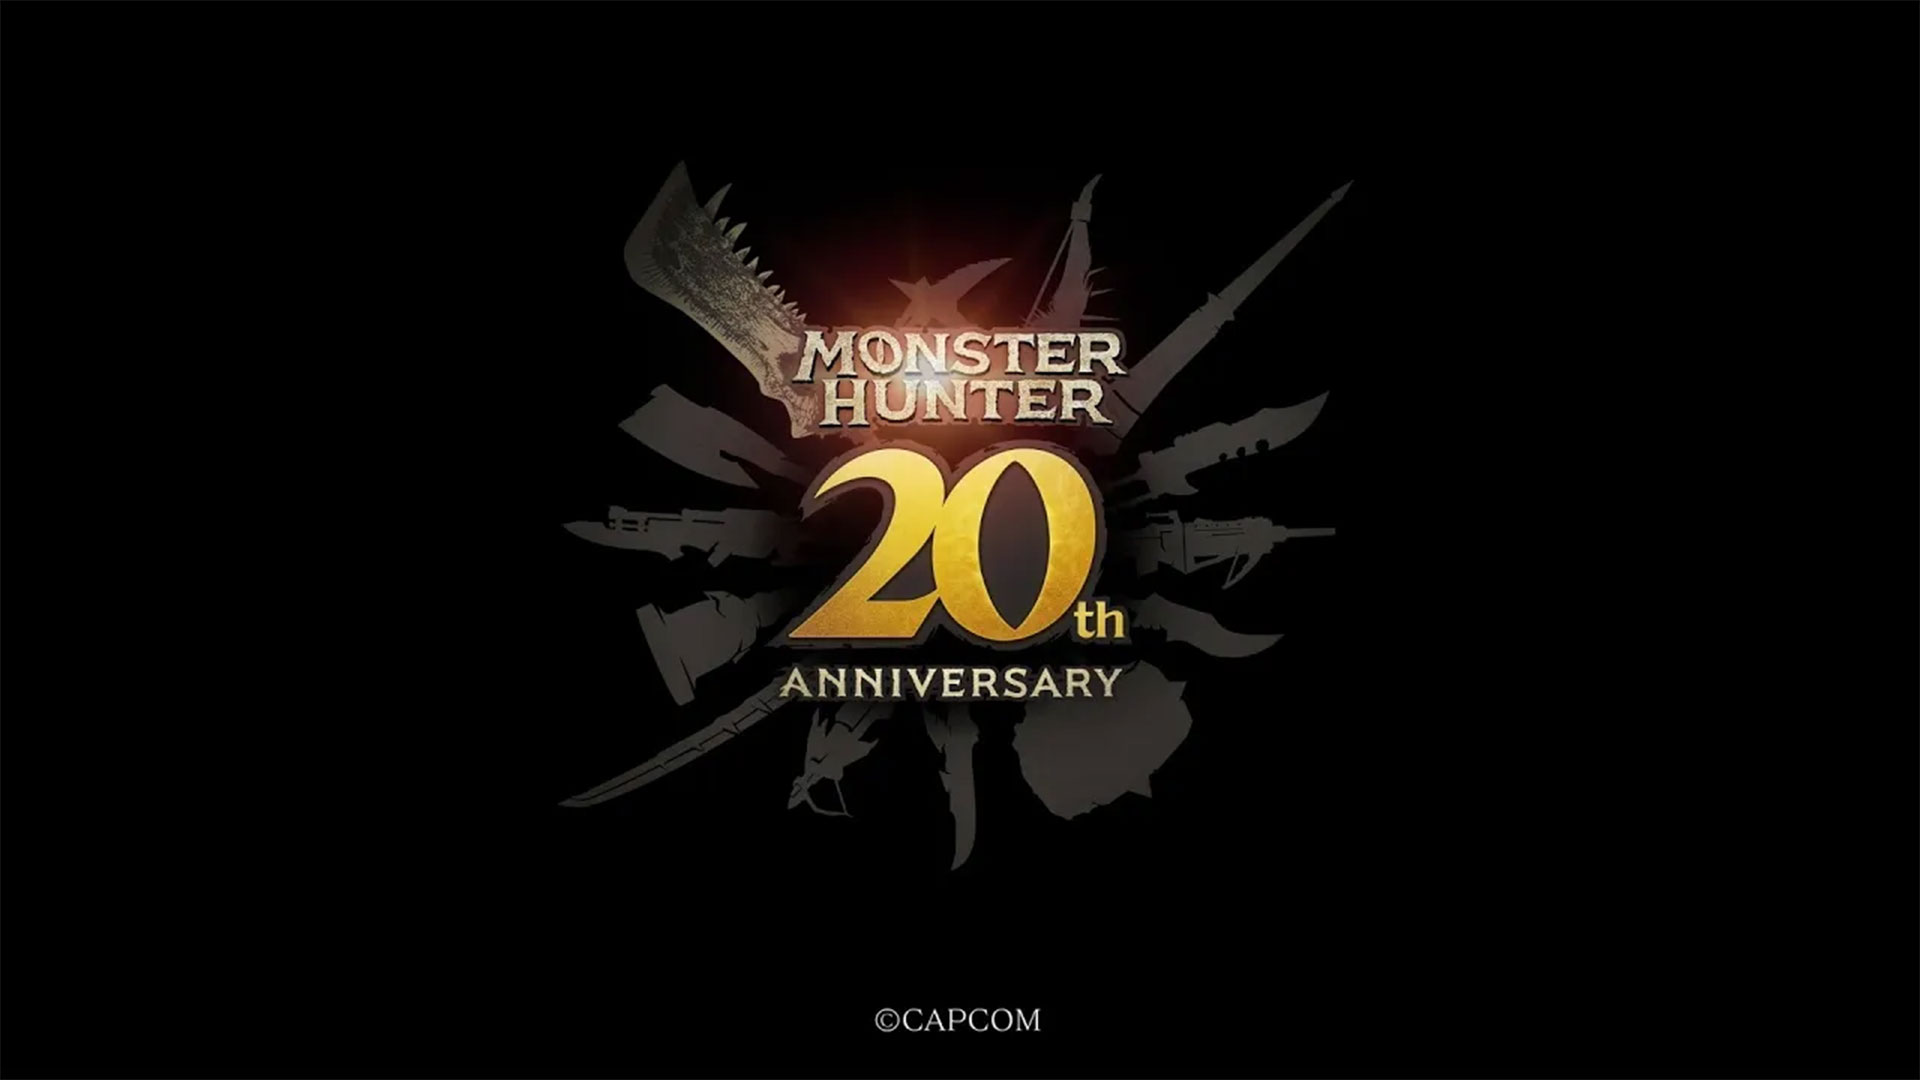 A Look Back at 20 Years of Monster Hunter